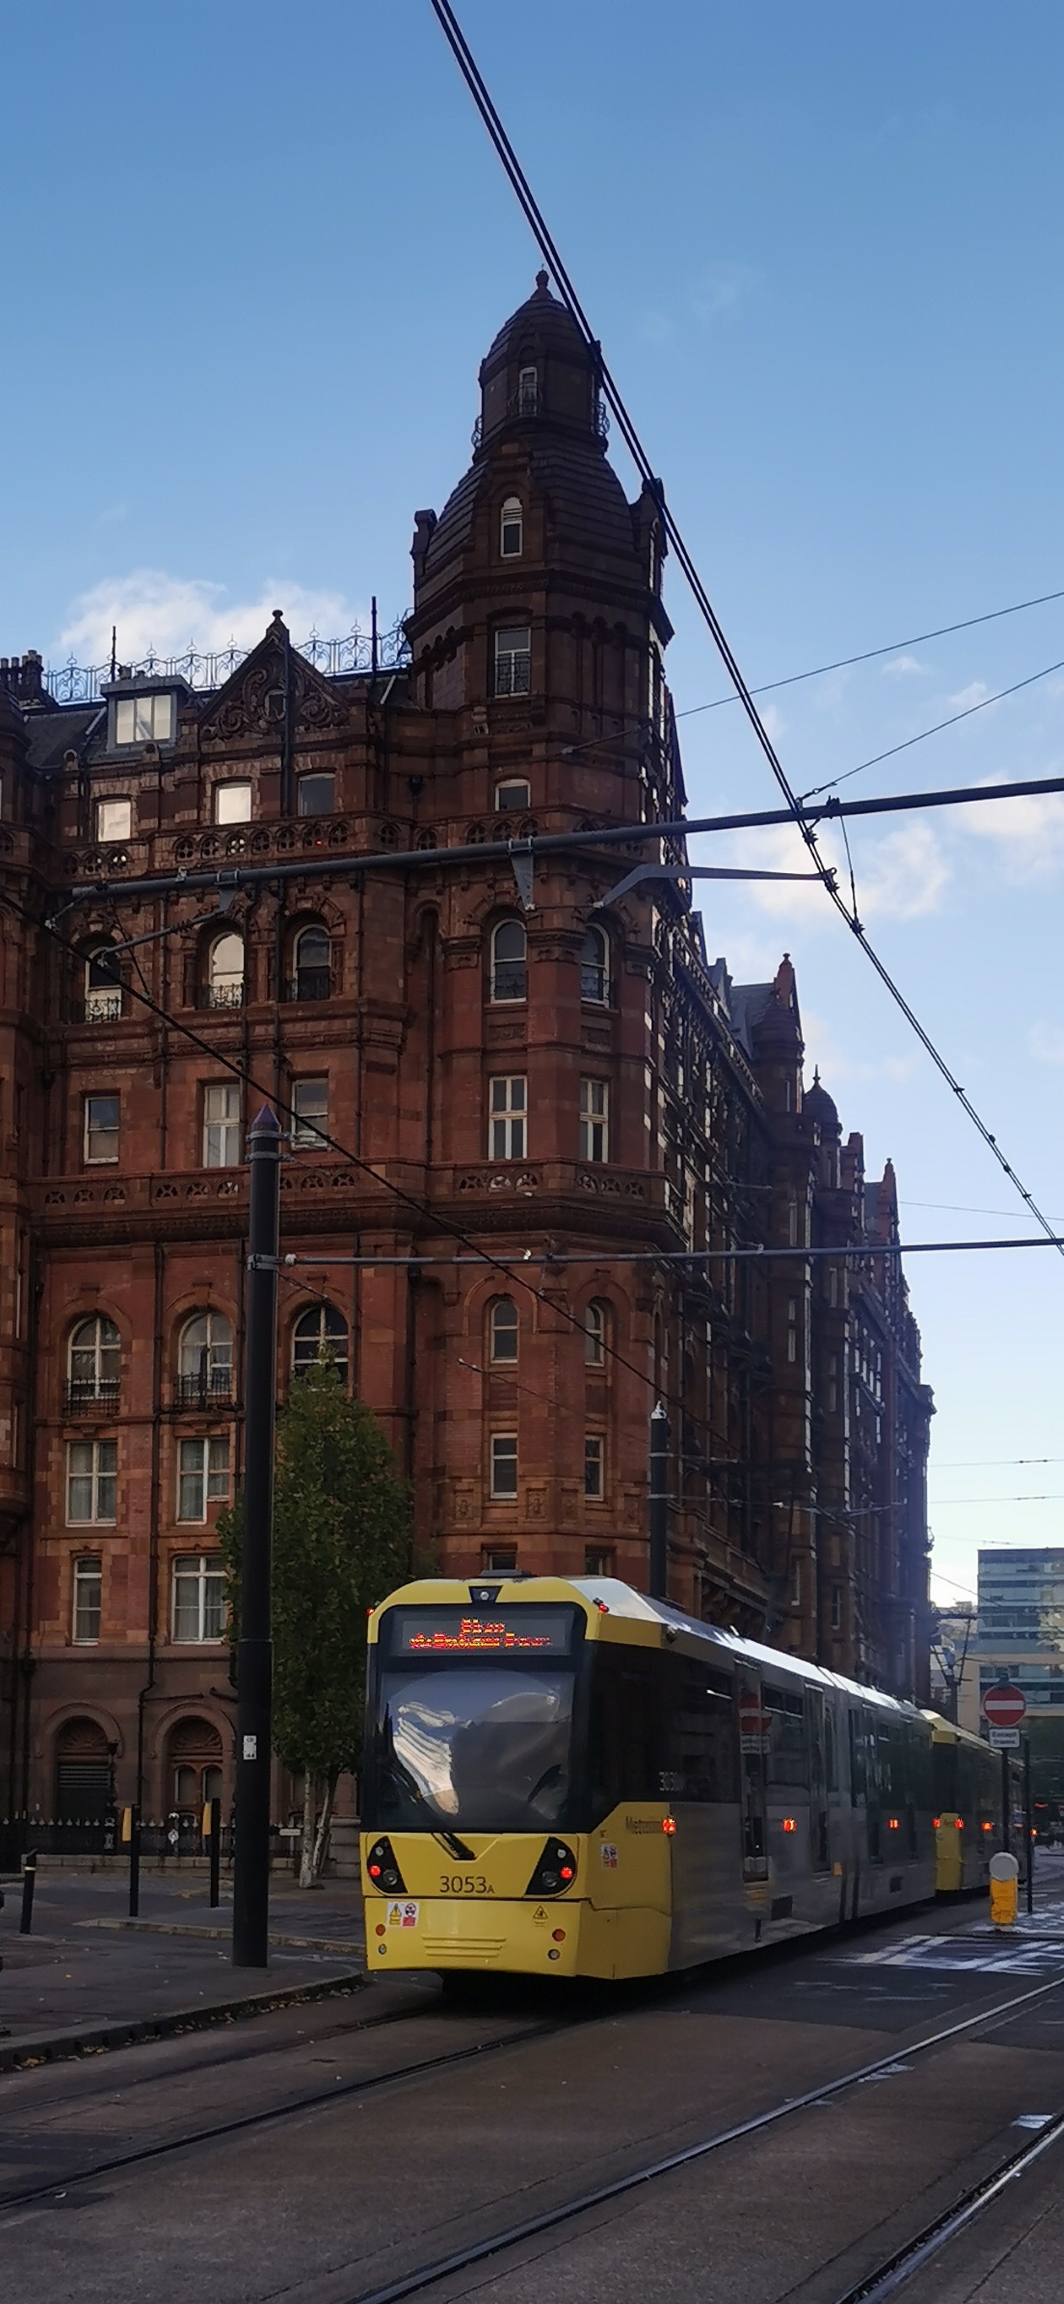 Photo taken between Manchester Central and Barbirolli Square